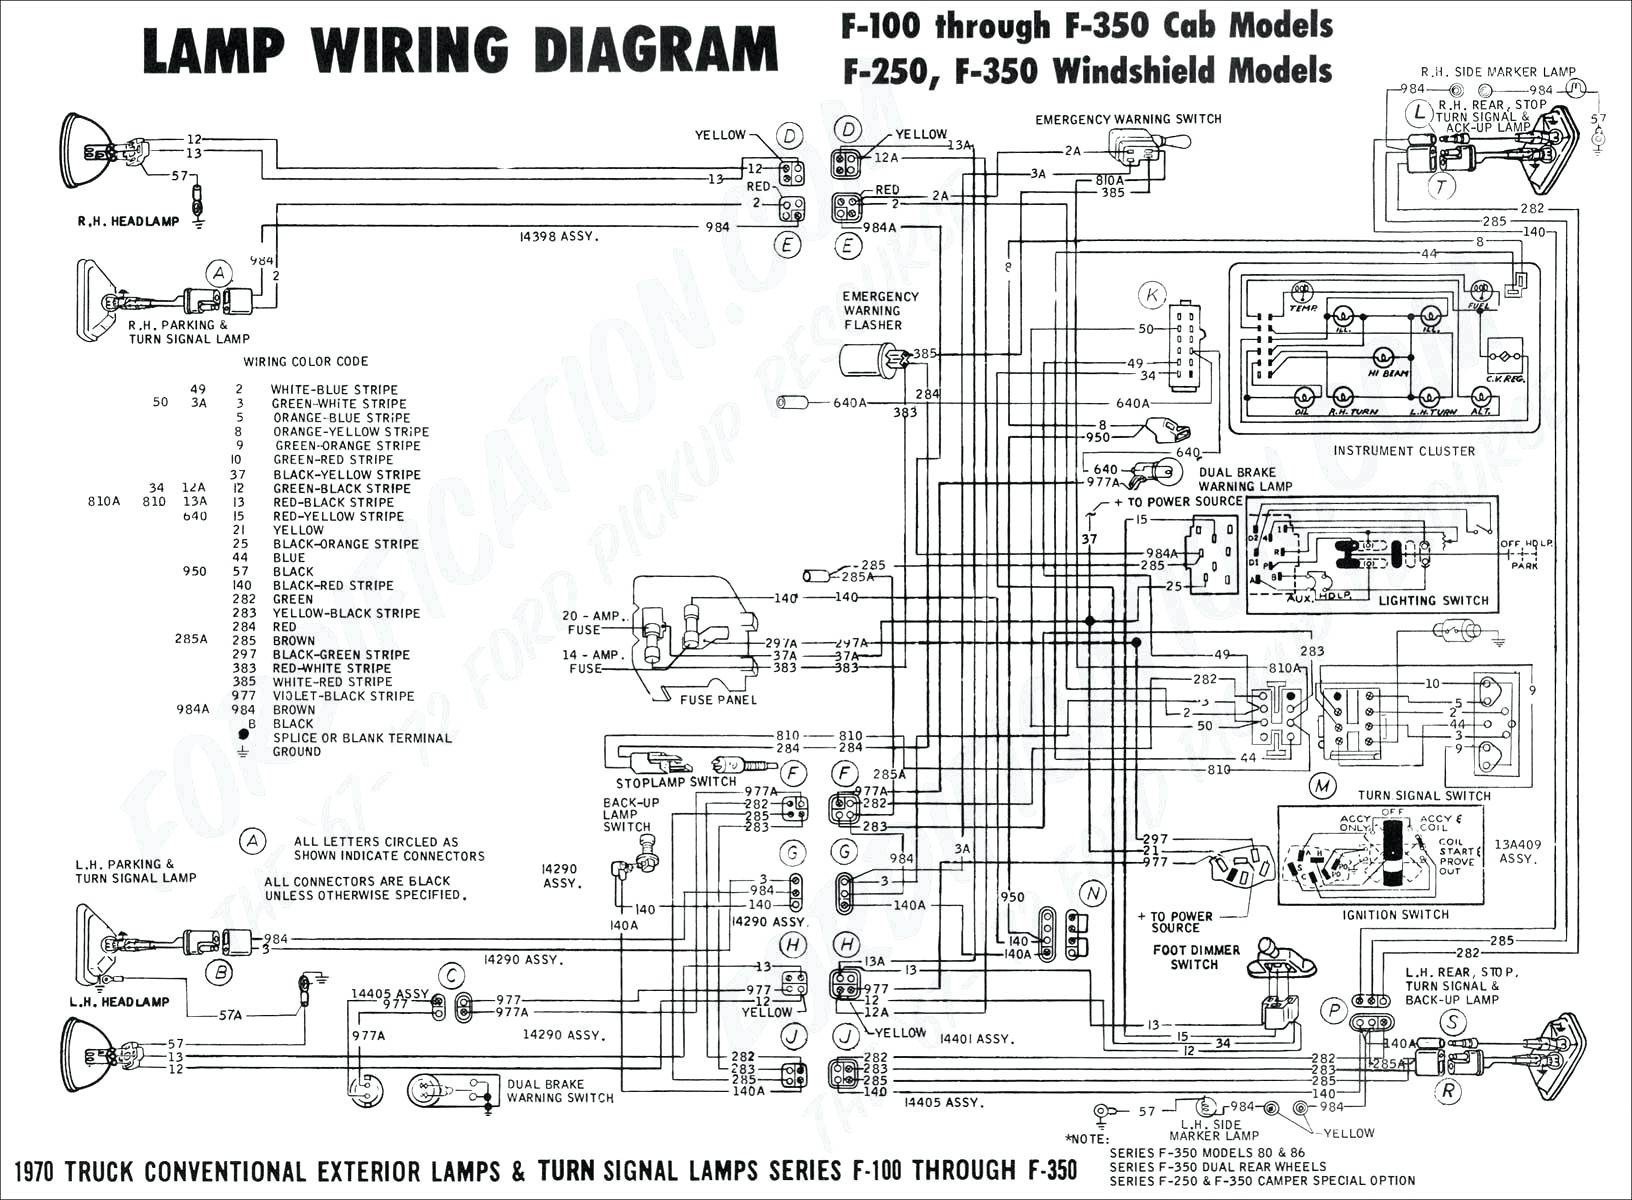 Stop Turn Tail Light Wiring Diagram Awesome Unique Tail Light Wiring Diagram Diagram